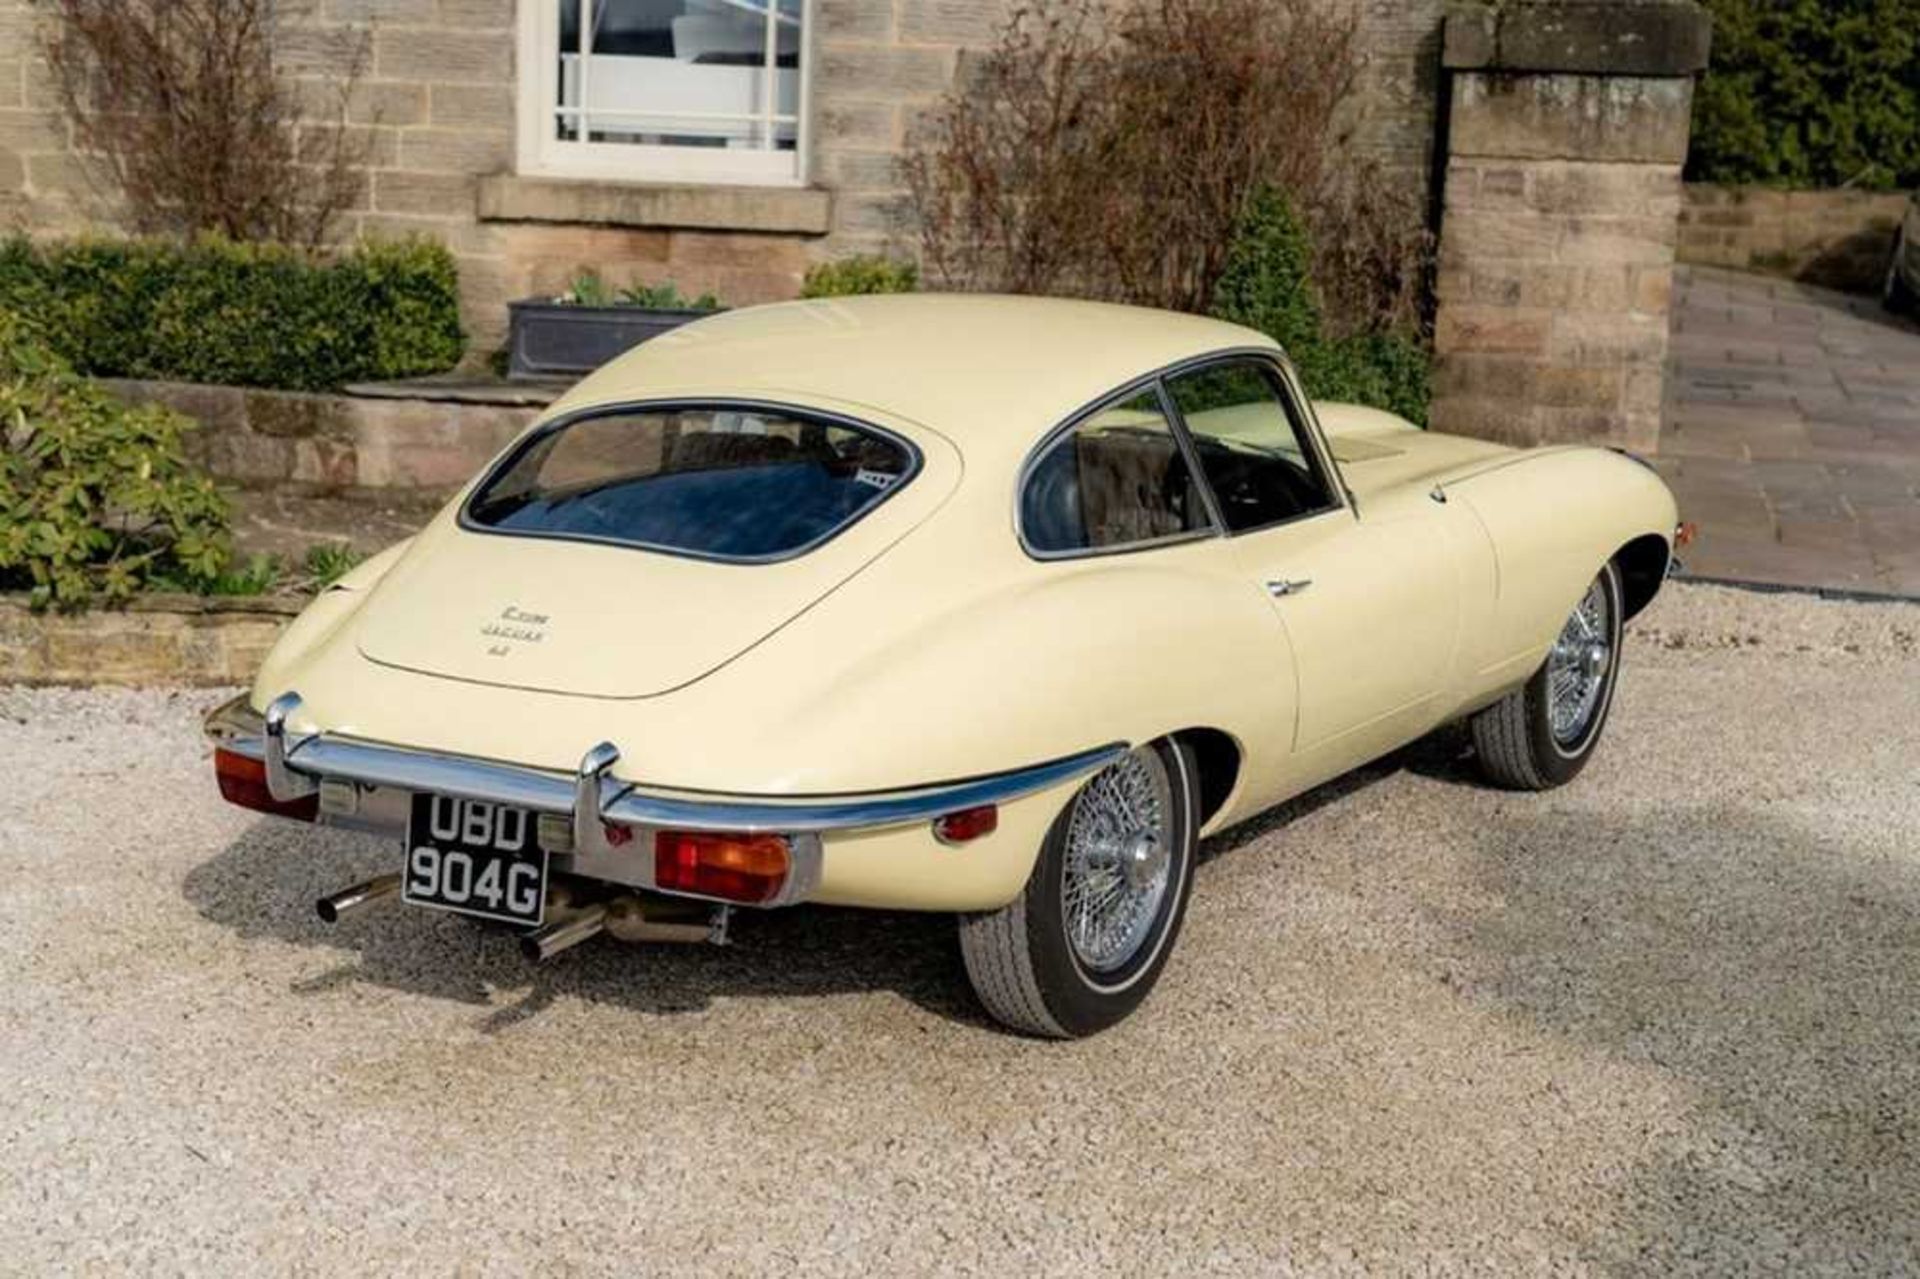 1968 Jaguar E-Type 4.2 Litre Coupe Genuine 44,000 miles from new - Image 35 of 68